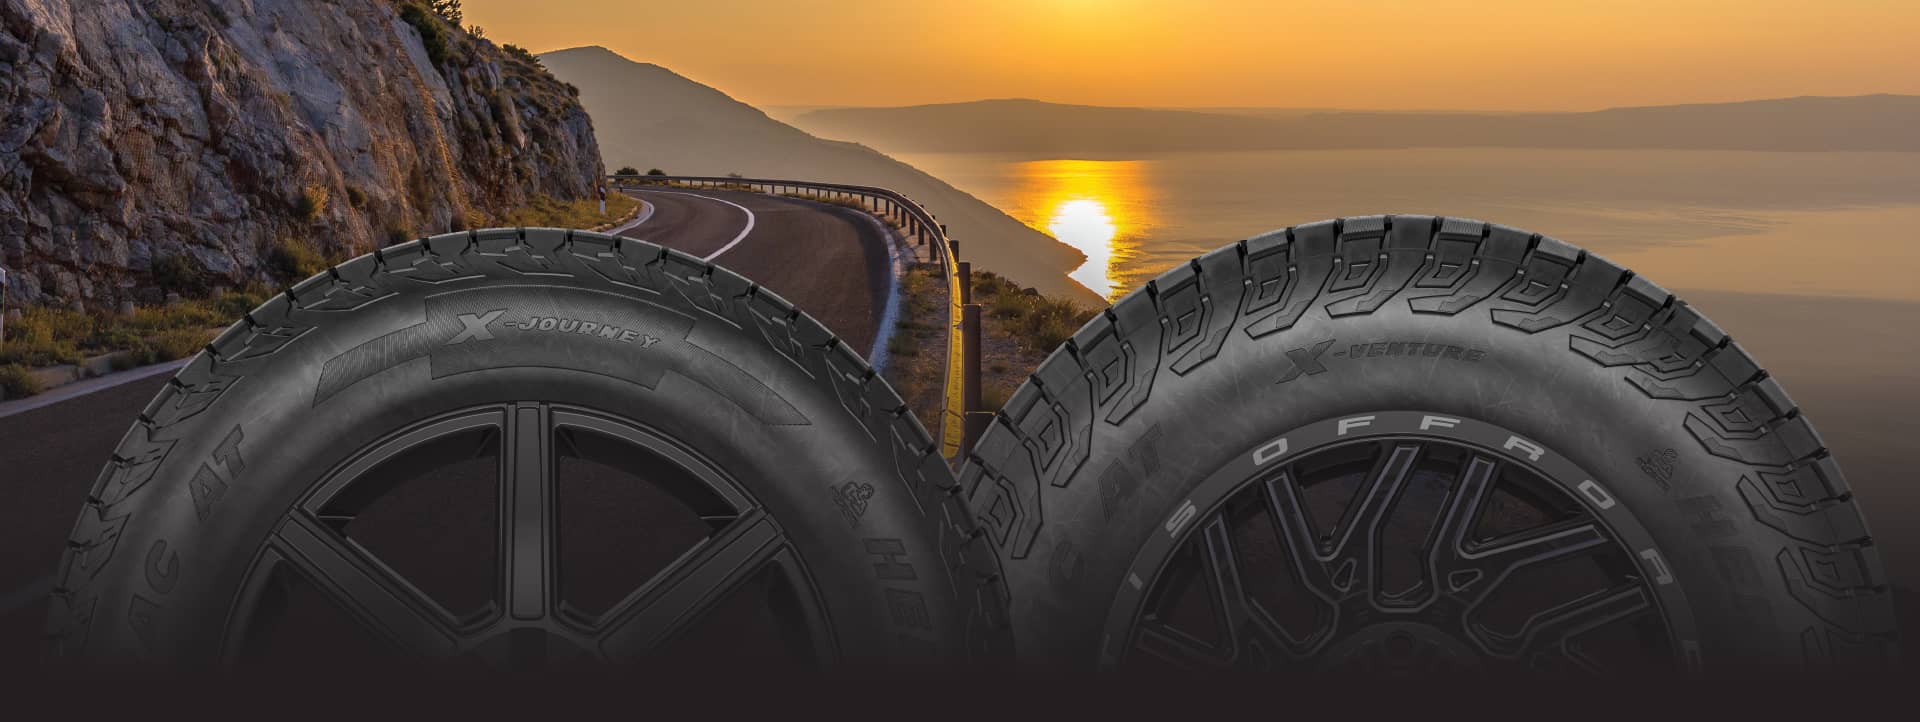 image showing winding coastline highway at sunset in the background with the X-Venture and X-Journey tires in the foreground